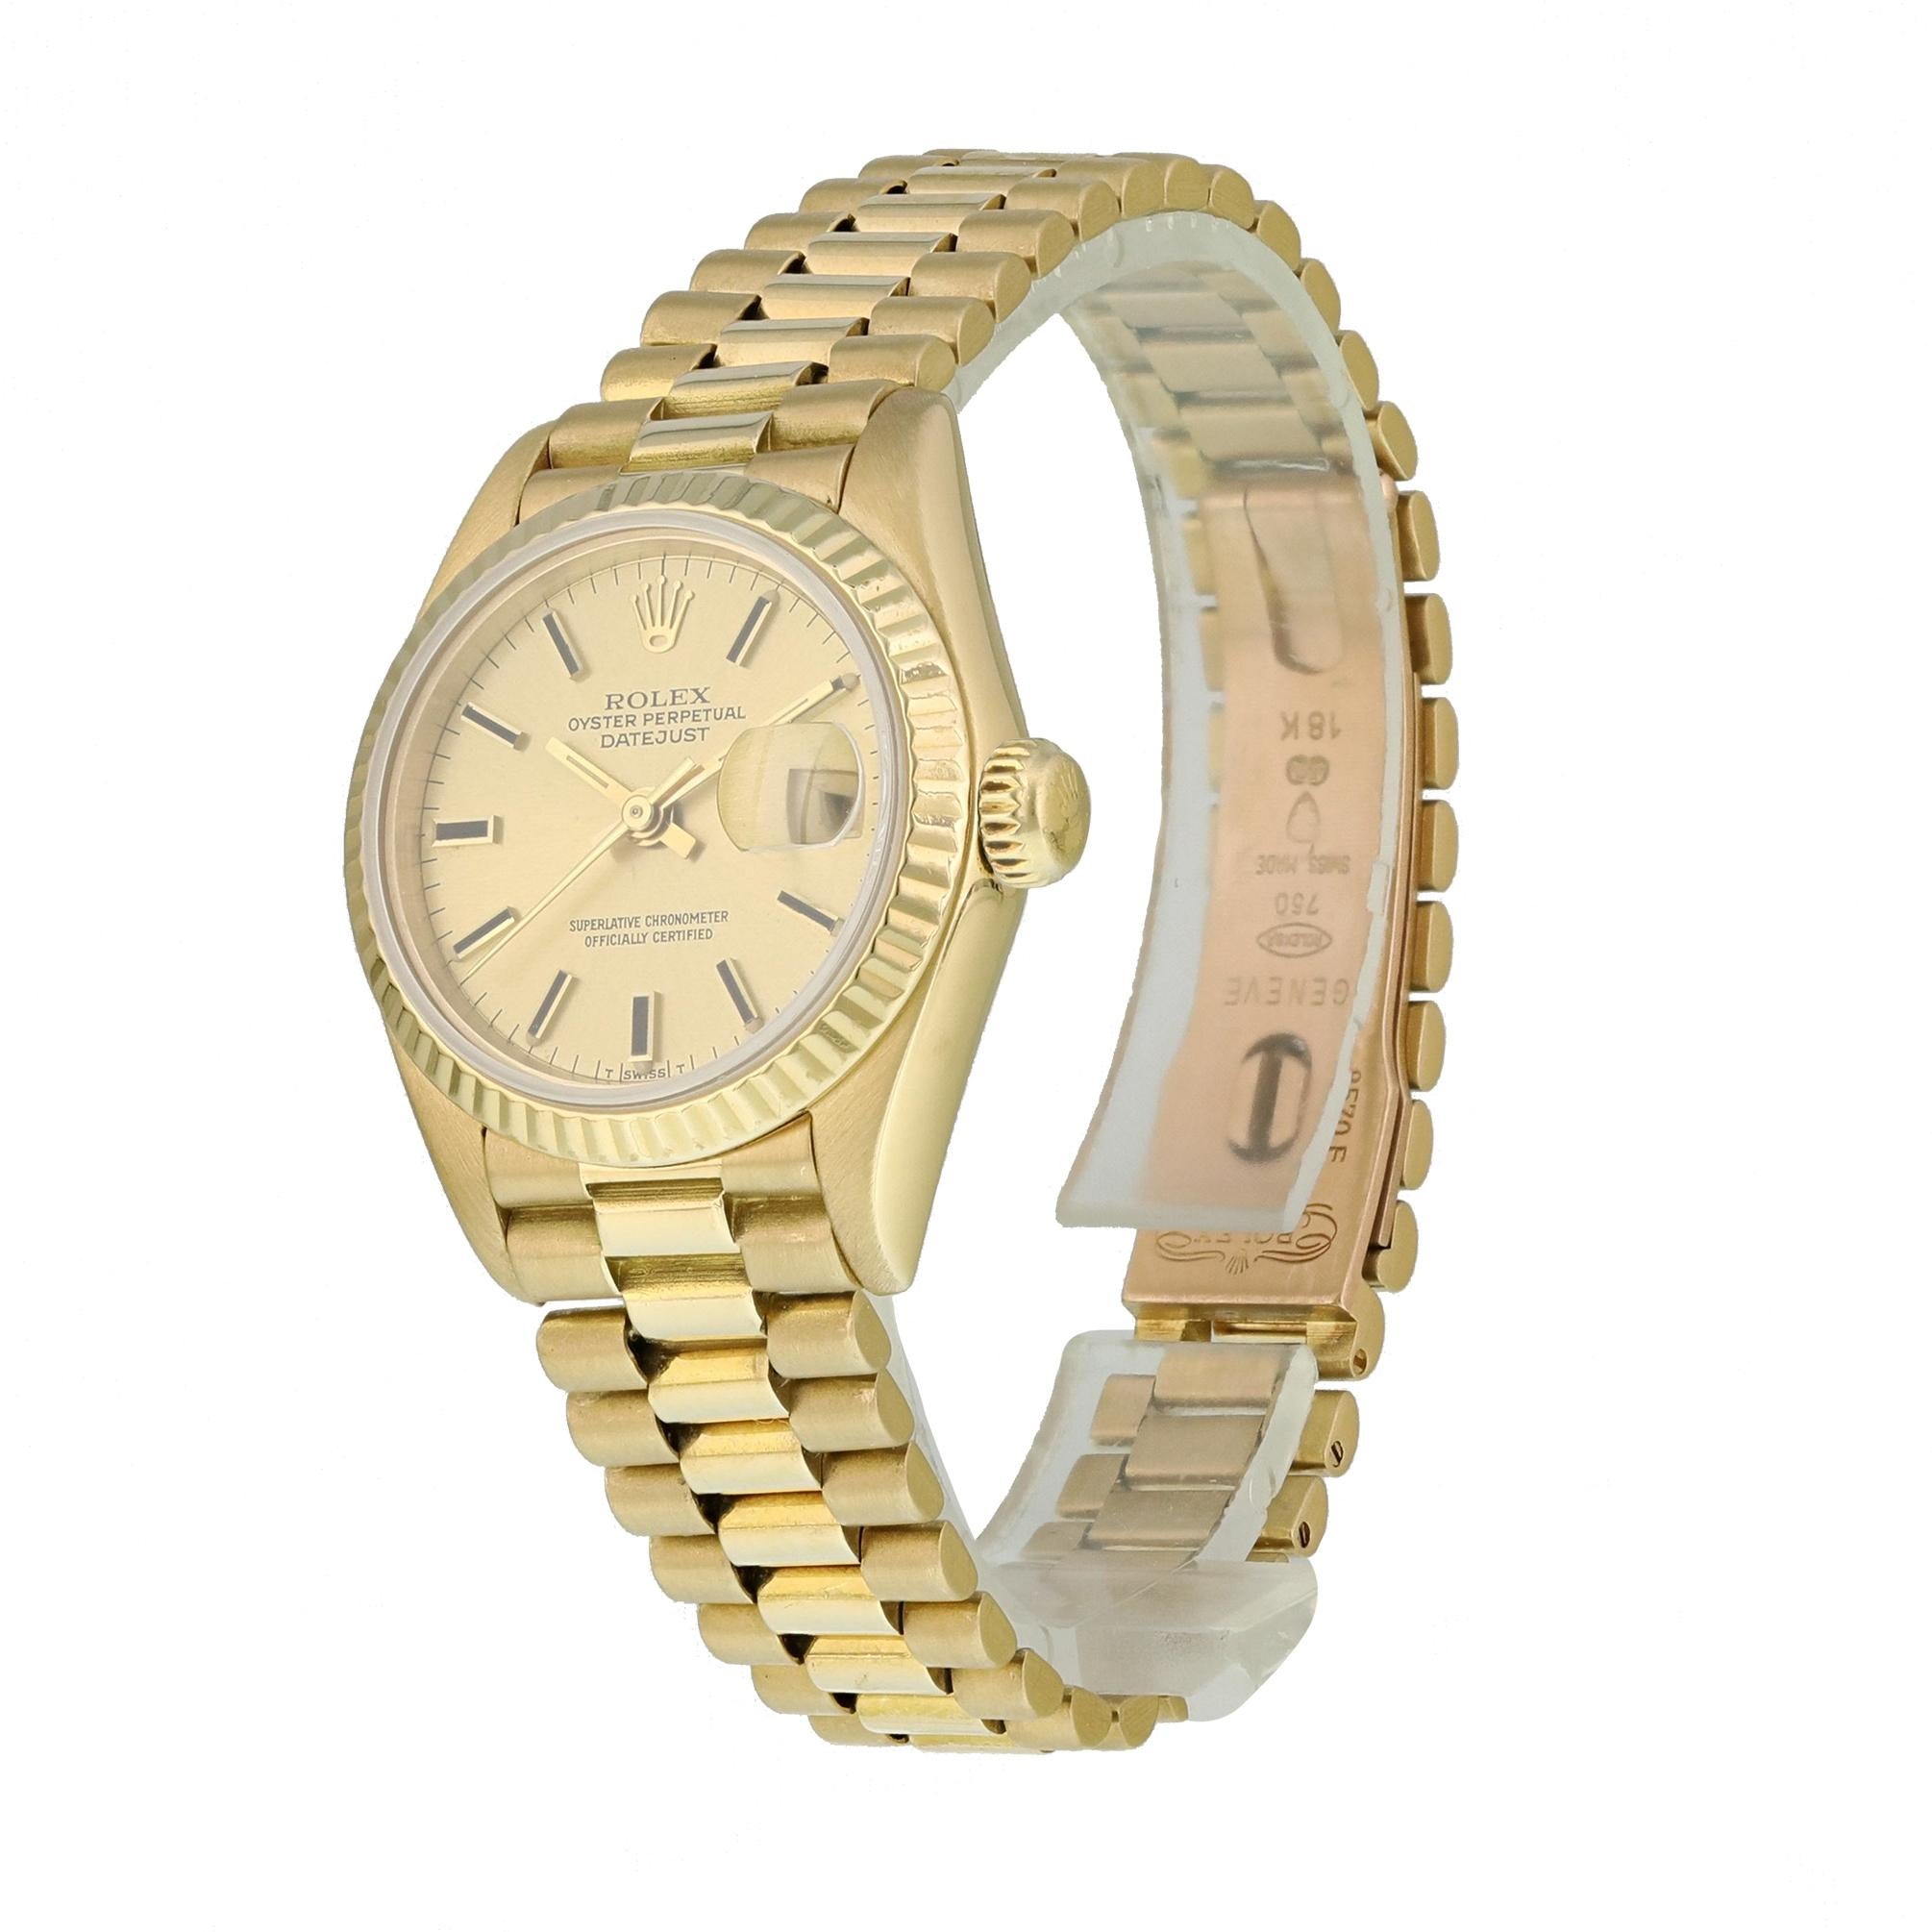 Rolex Oyster Perpetual Datejust 69178 Yellow Gold Ladies Watch
26mm 18k Yellow gold case.
Yellow Gold Stationary bezel.
Champagne dial with luminous gold hands and index hour markers.
Minute markers on the outer dial.
Date display at the 3 o'clock